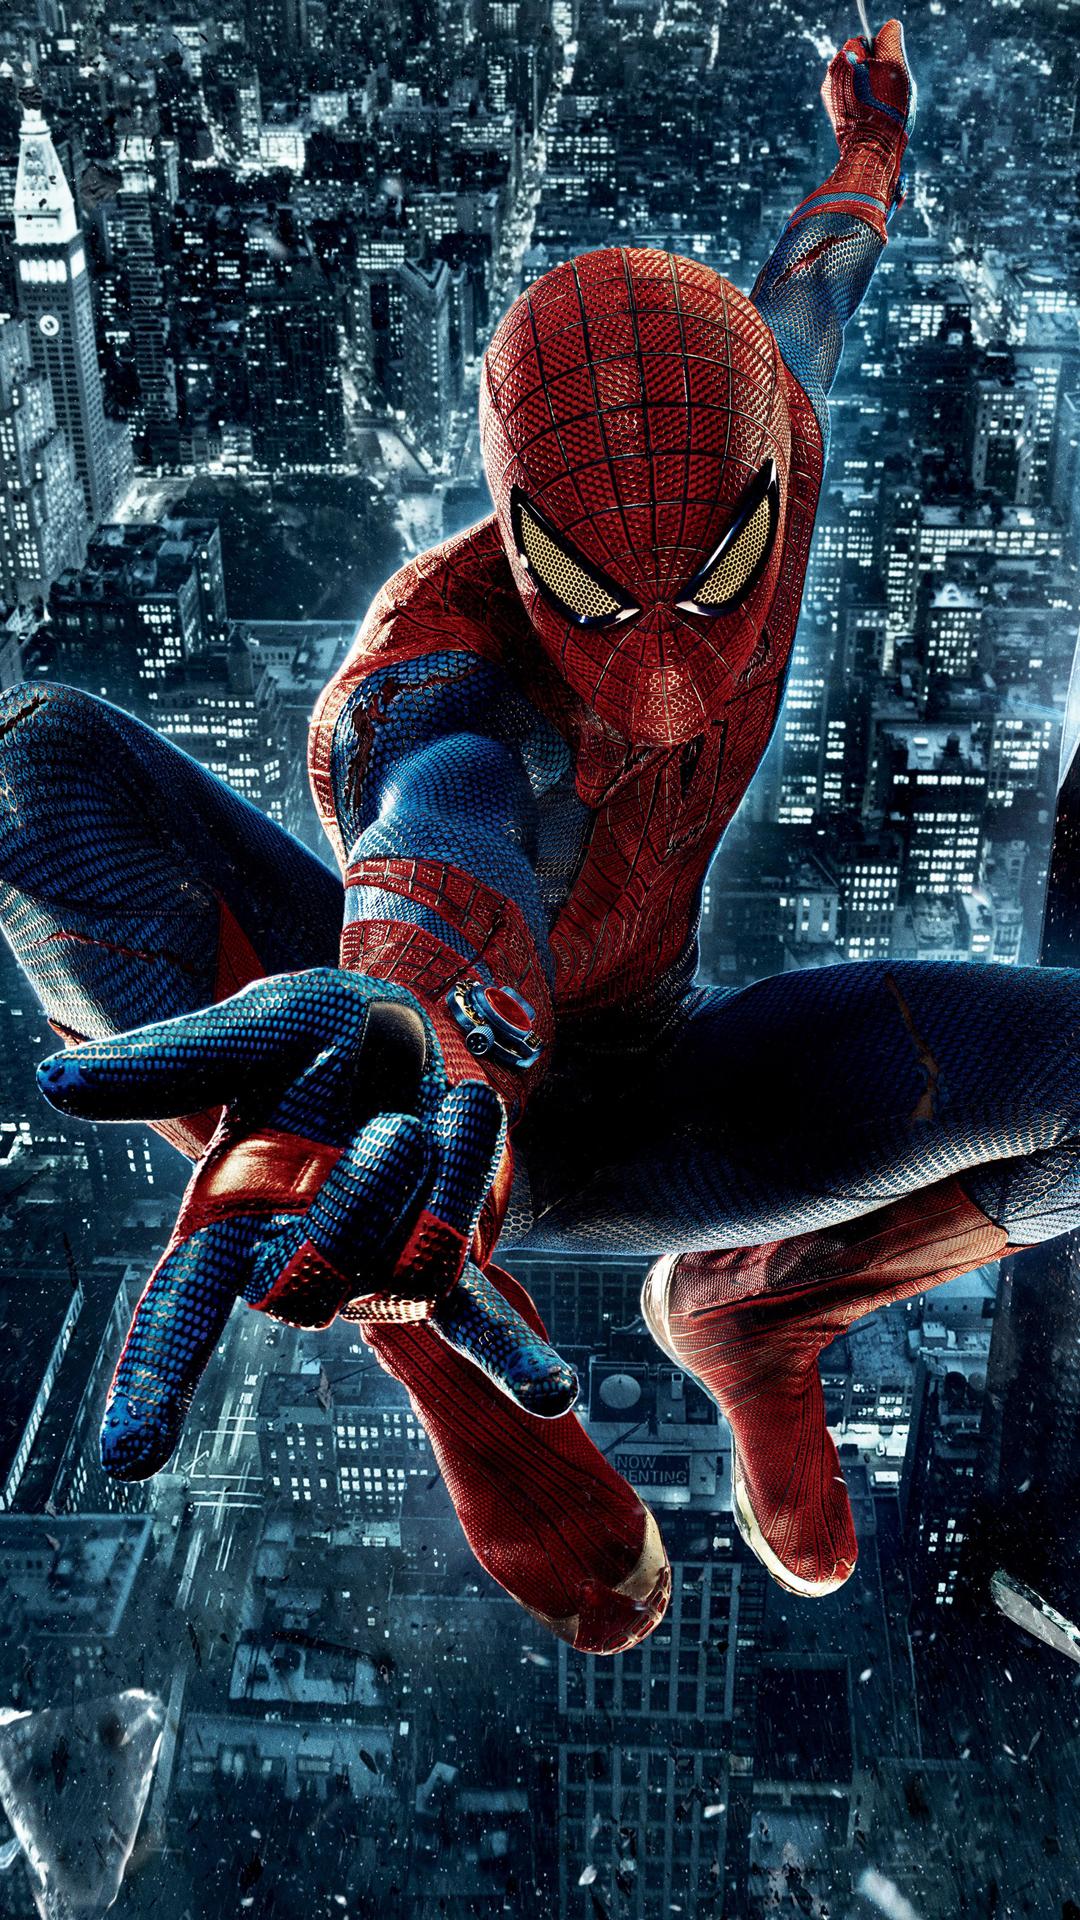 1080 x 1920 · jpeg - Spiderman htc one wallpaper - Best htc one wallpapers, free and easy to ...